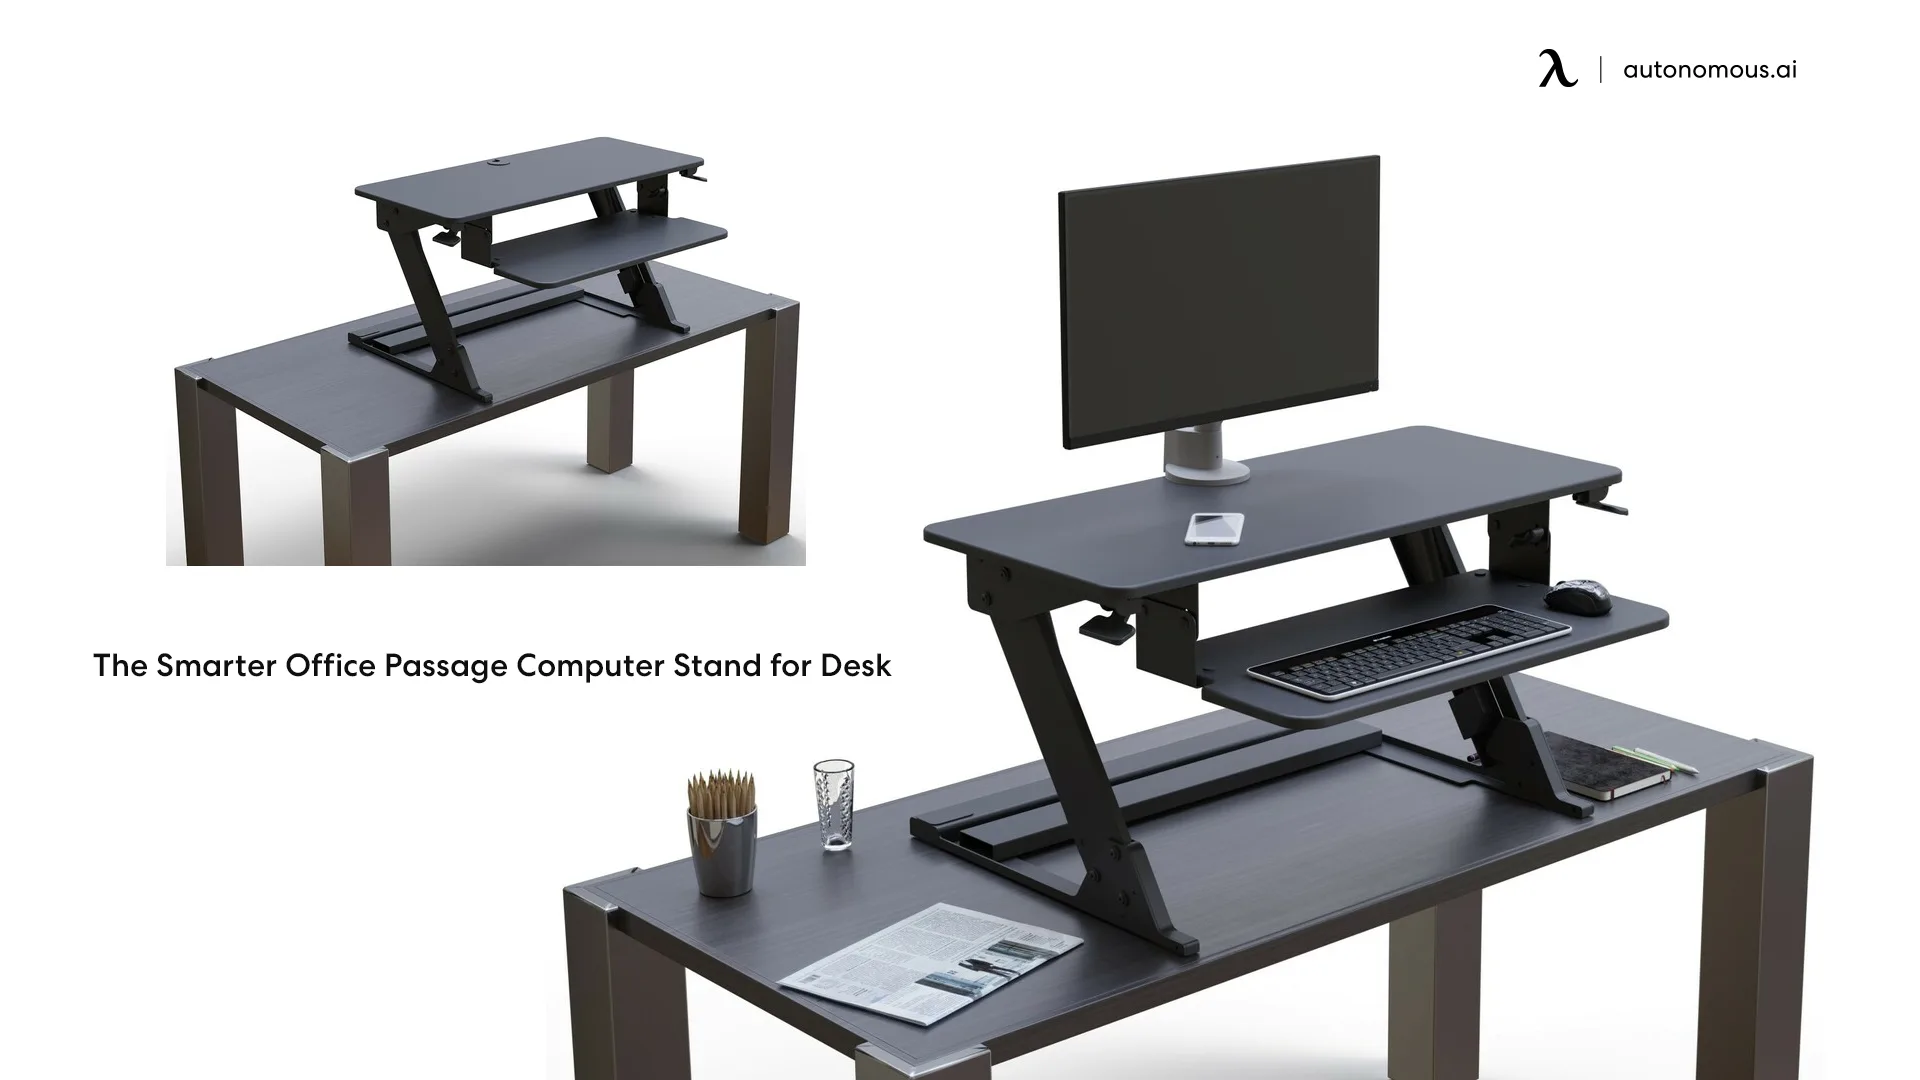 The Smarter Office Passage Computer Stand for Desk